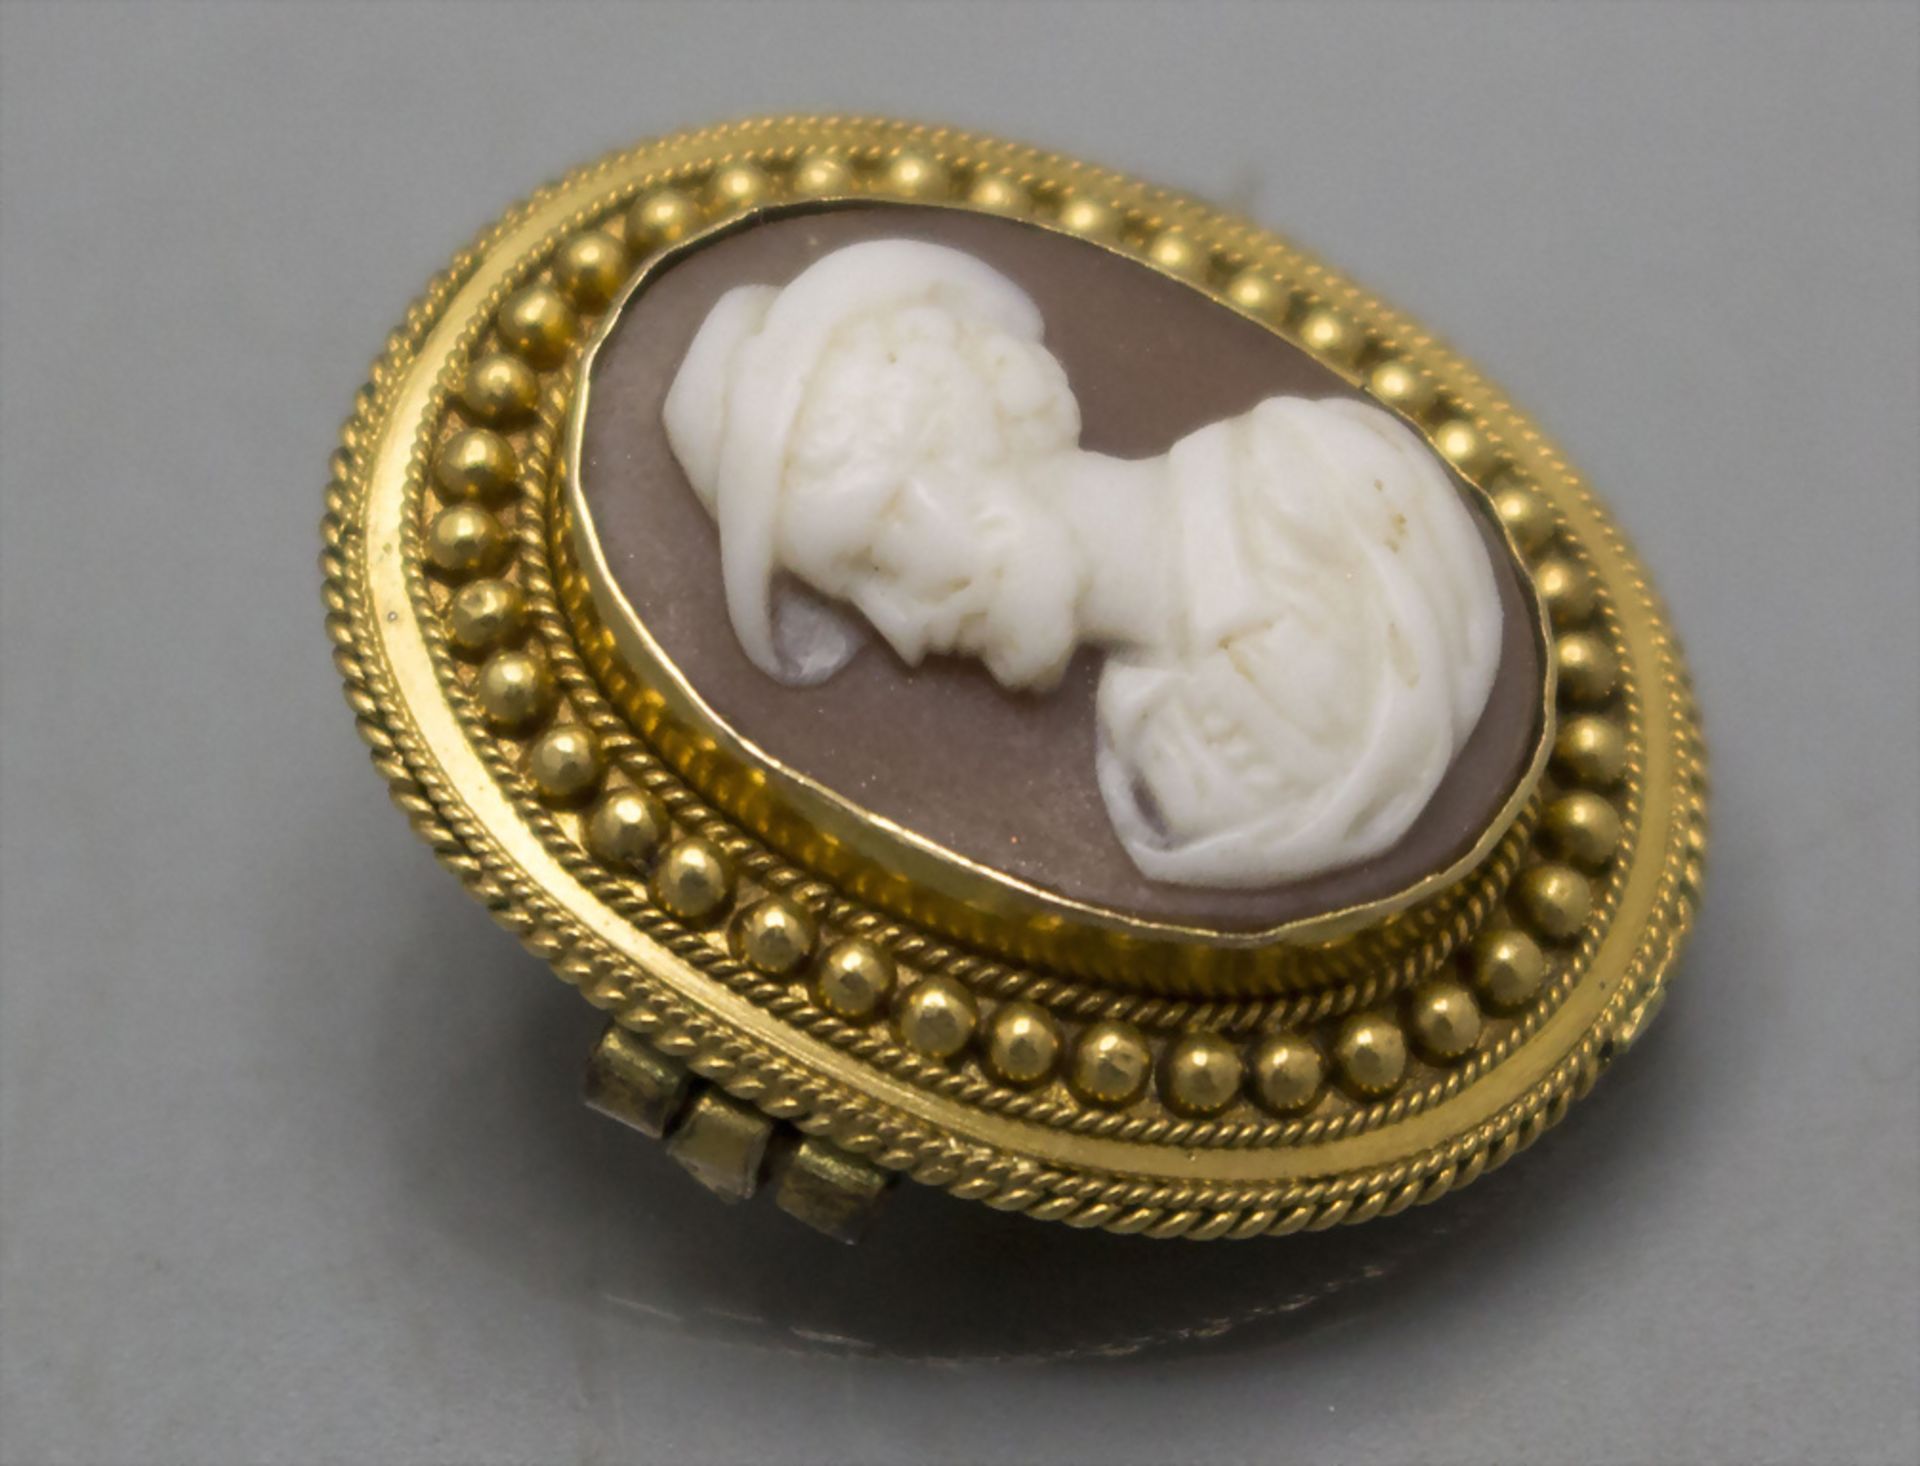 Kamee Brosche / A cameo brooch in a gold frame - Image 2 of 3